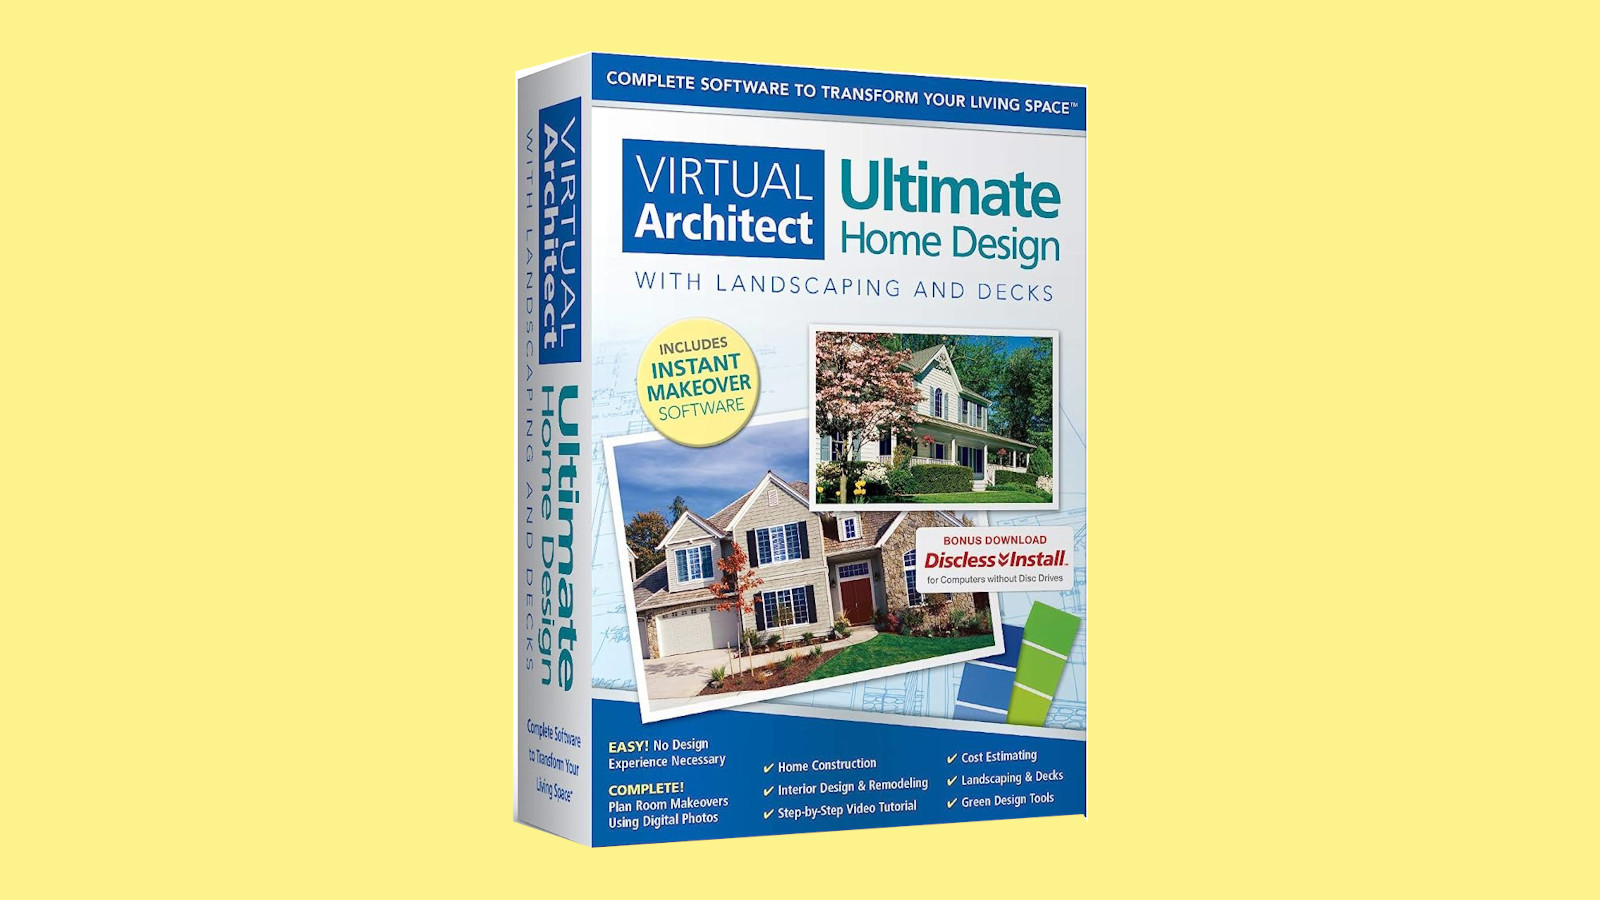 [$ 77.68] Virtual Architect Ultimate Home Design with Landscaping and Decks CD Key